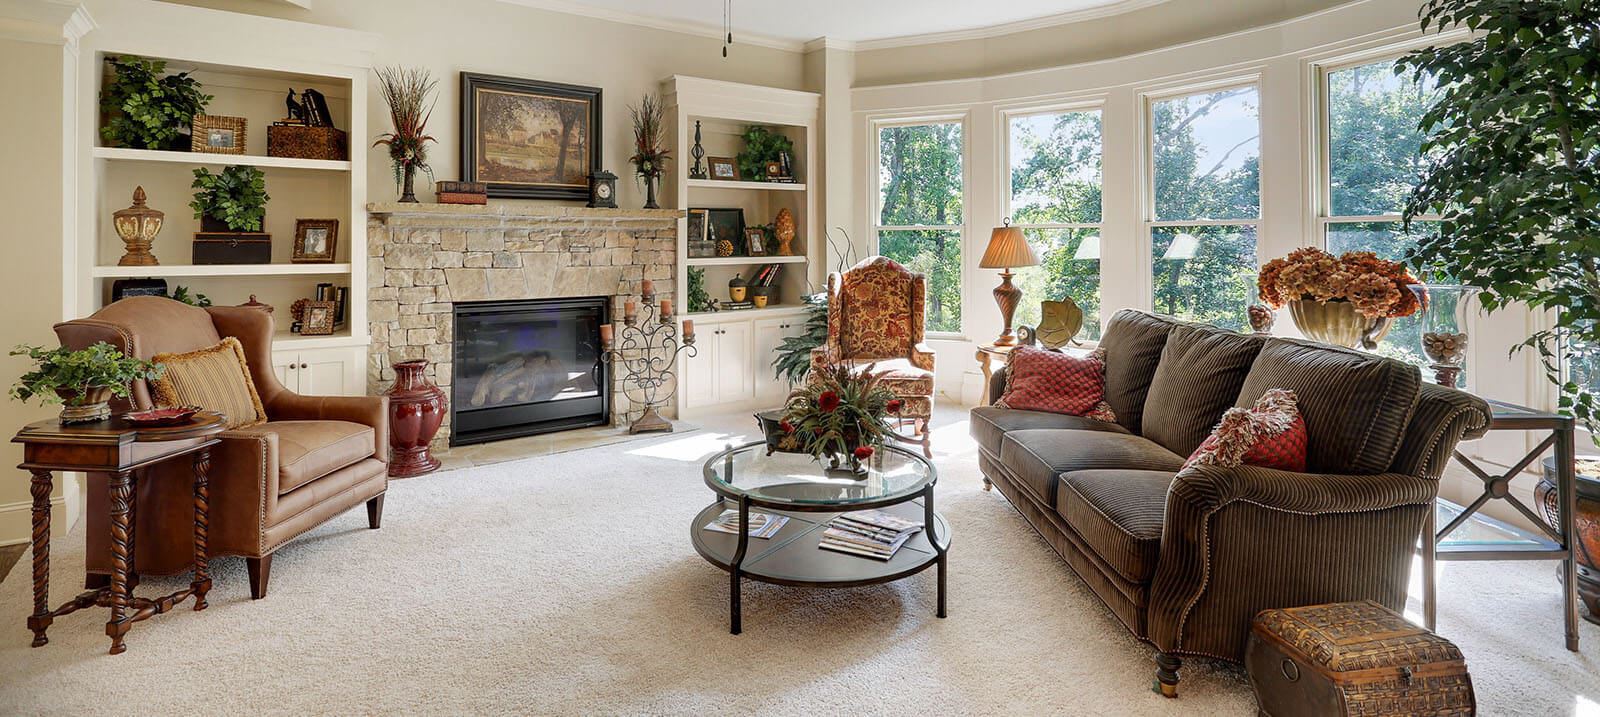 Living area with fireplace and floor to ceiling windows in Harcrest Homes model home.